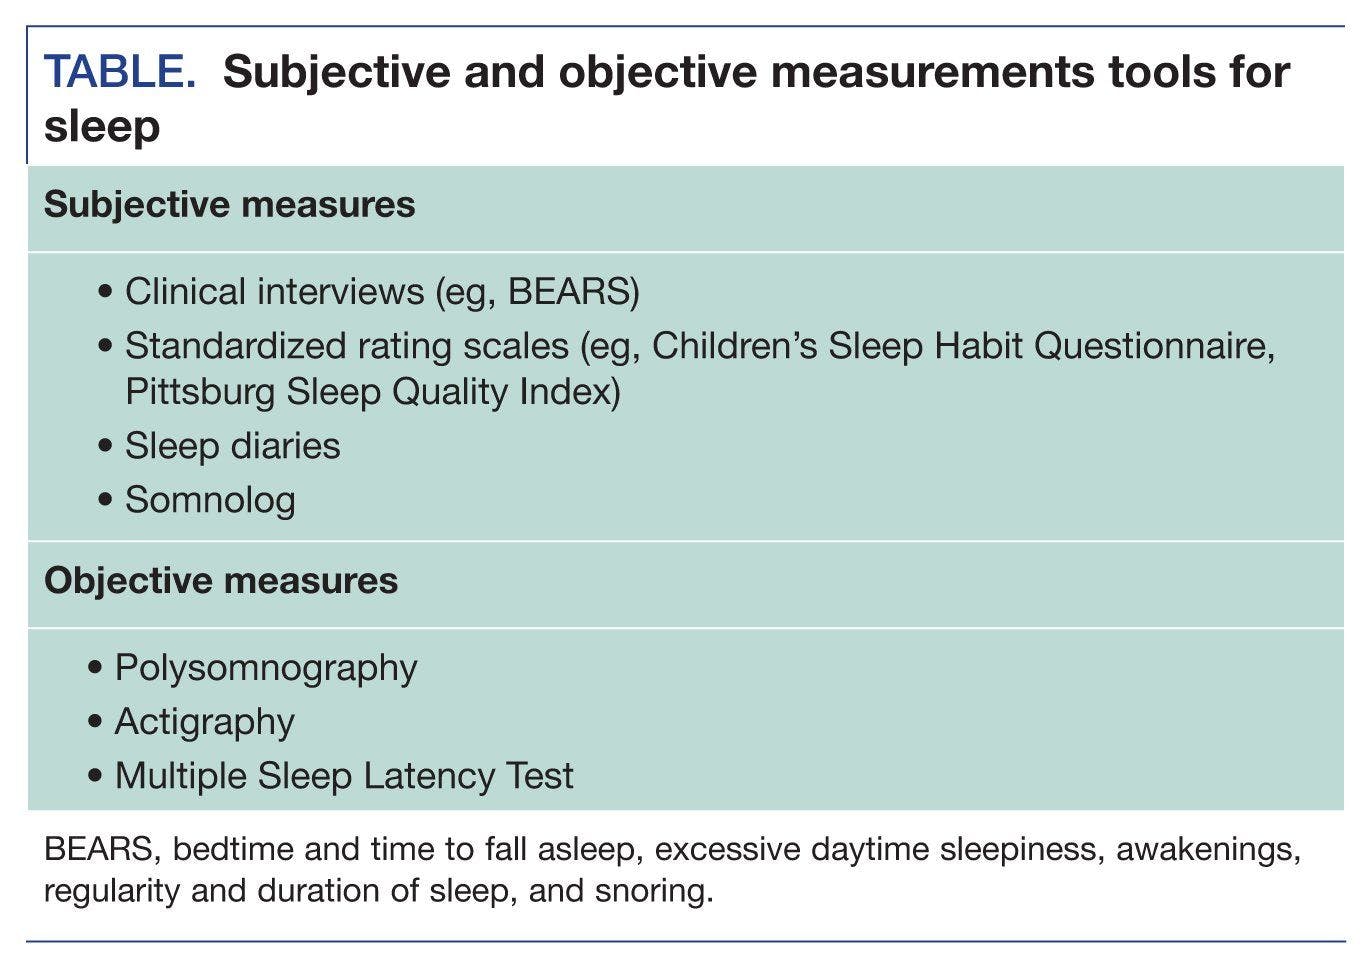 Subjective and objective measurements tools for sleep